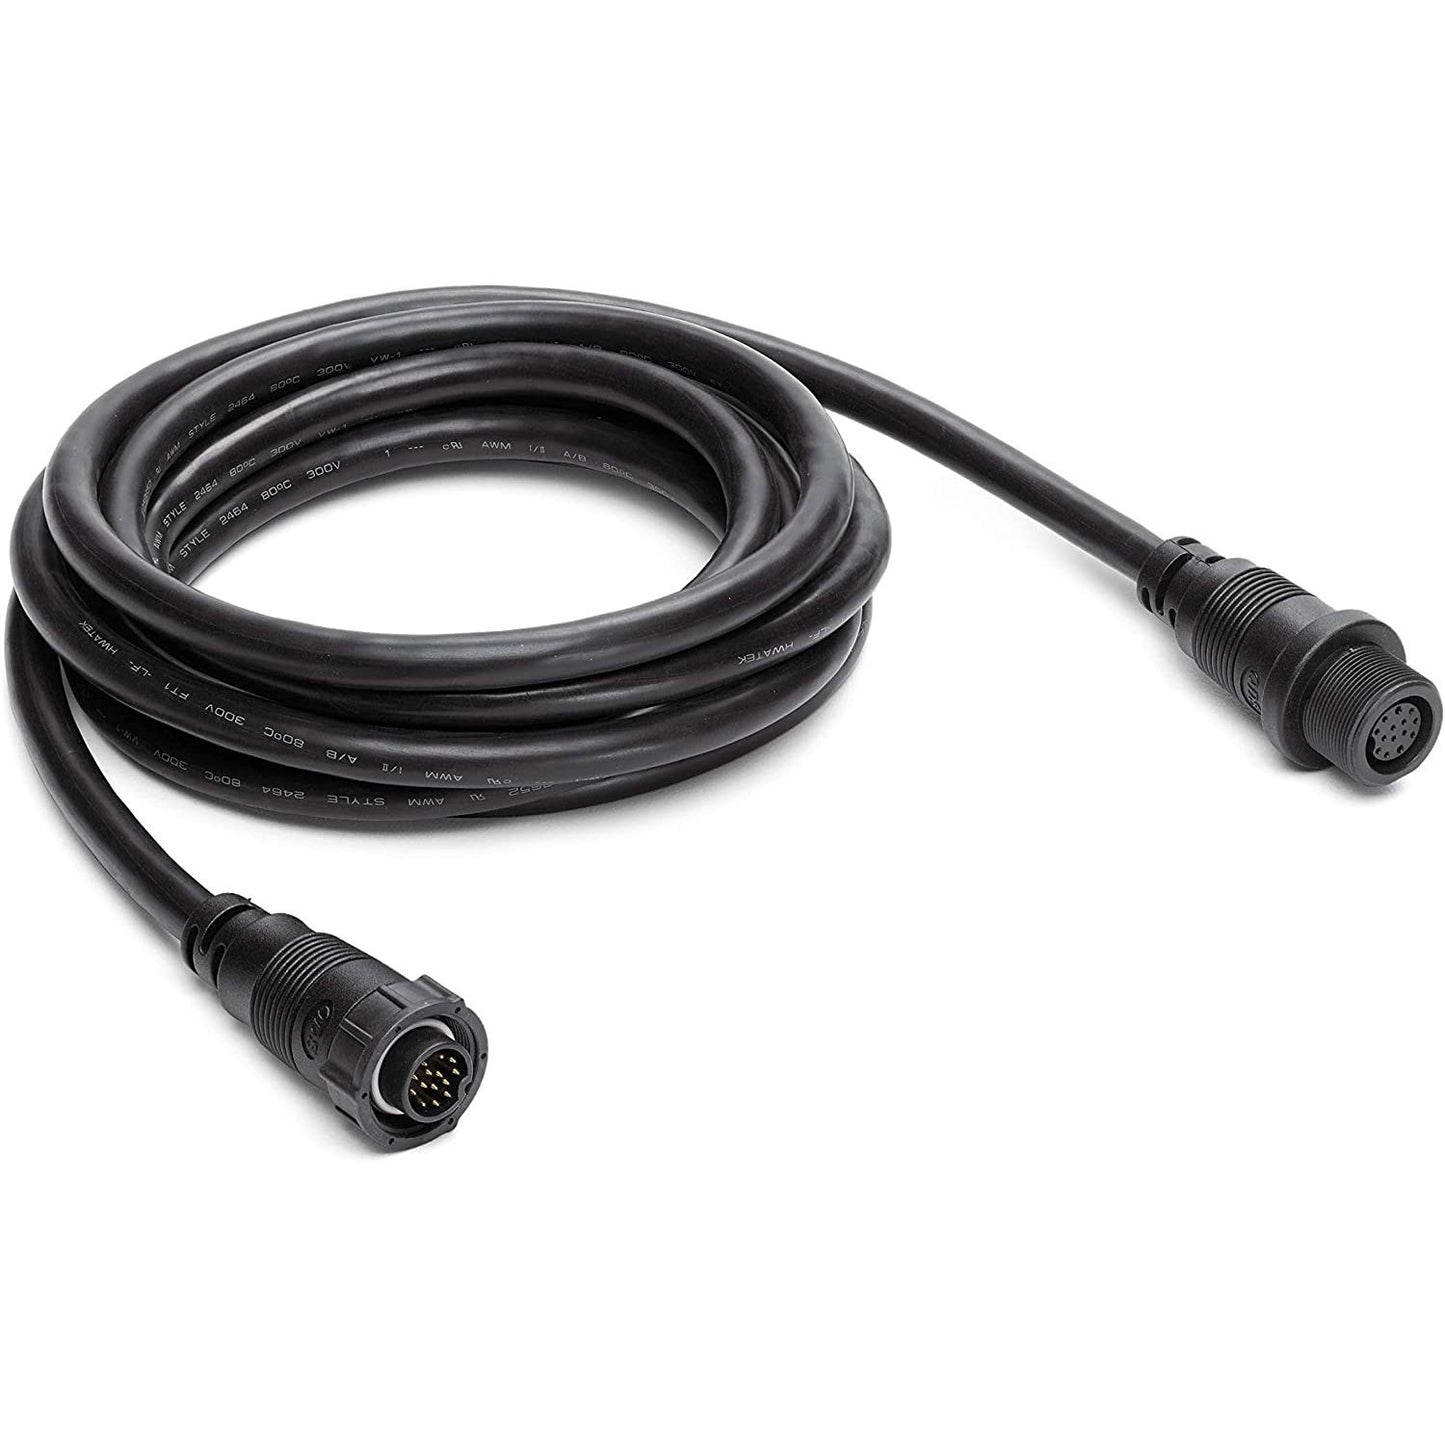 Humminbird EC M3 14W10 - 14 pin (10') transducer extension cable